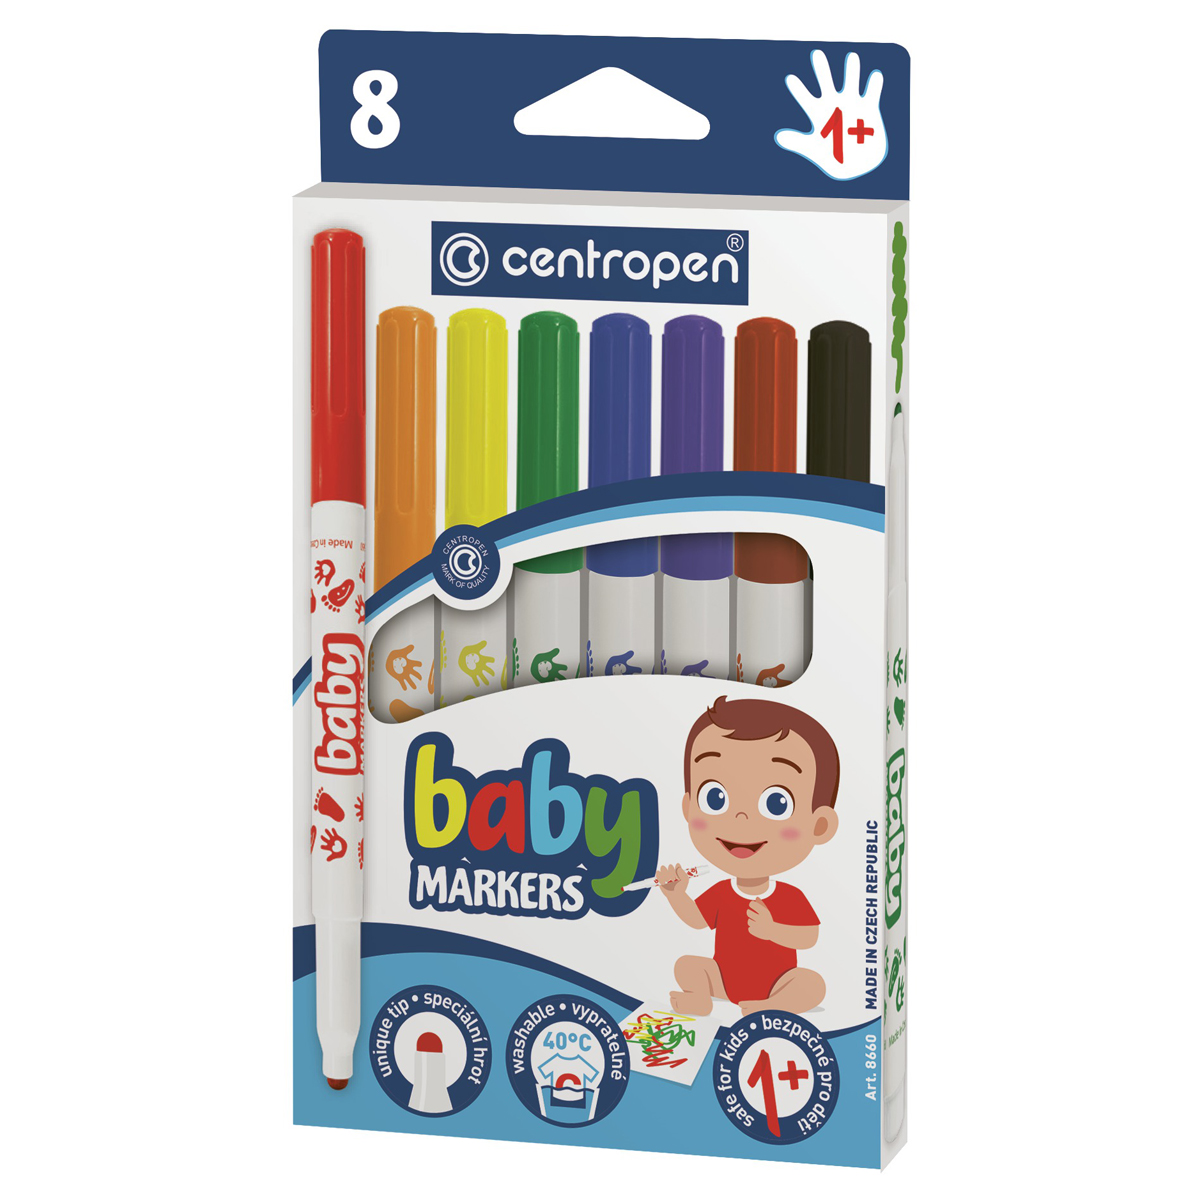  Centropen "Baby markers", 08.,  